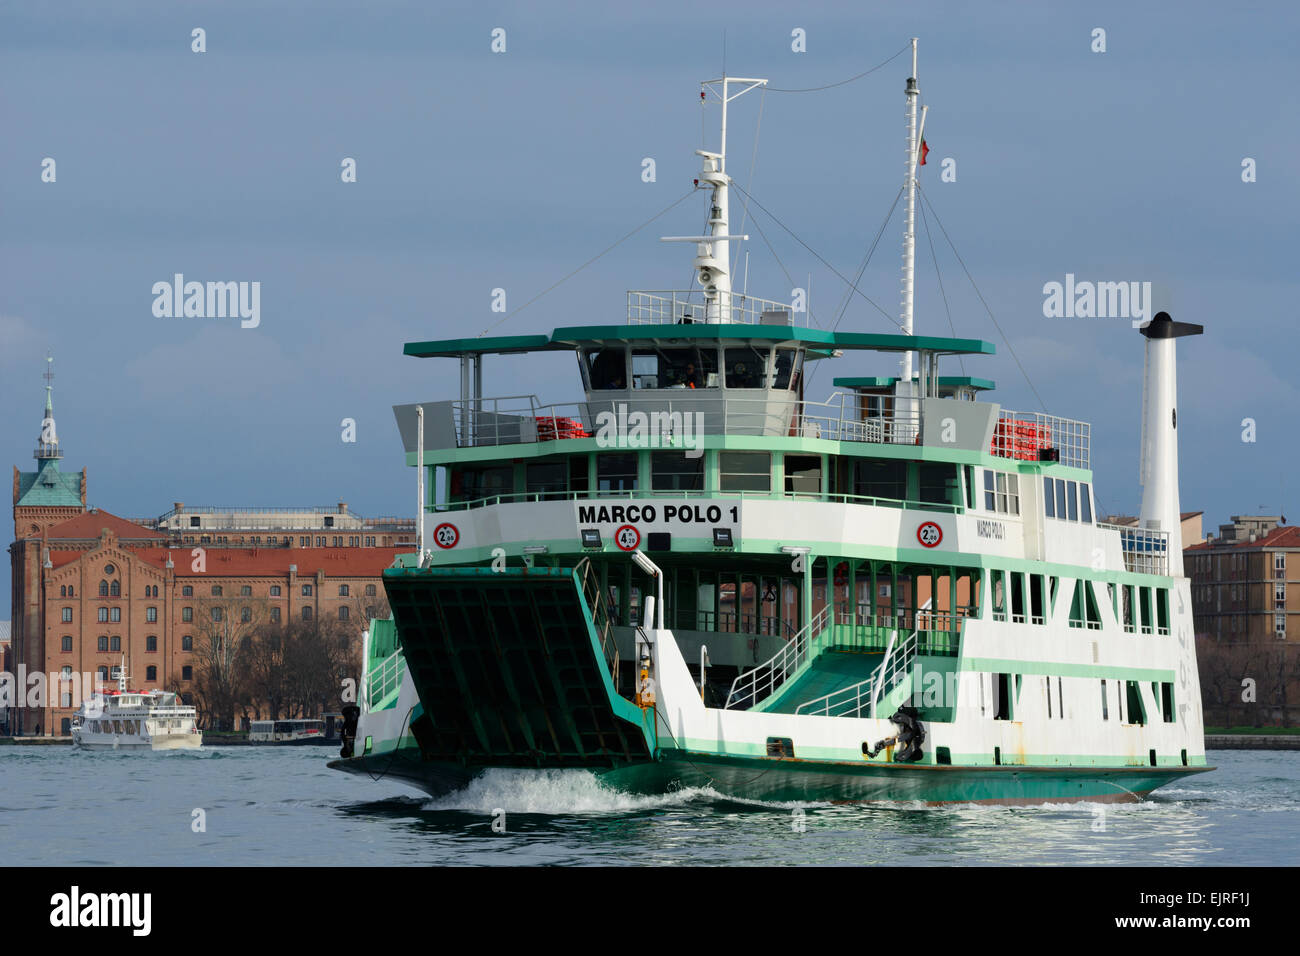 Public ferries and water taxis on the Grand Canal, Venice, Italy. Stock Photo